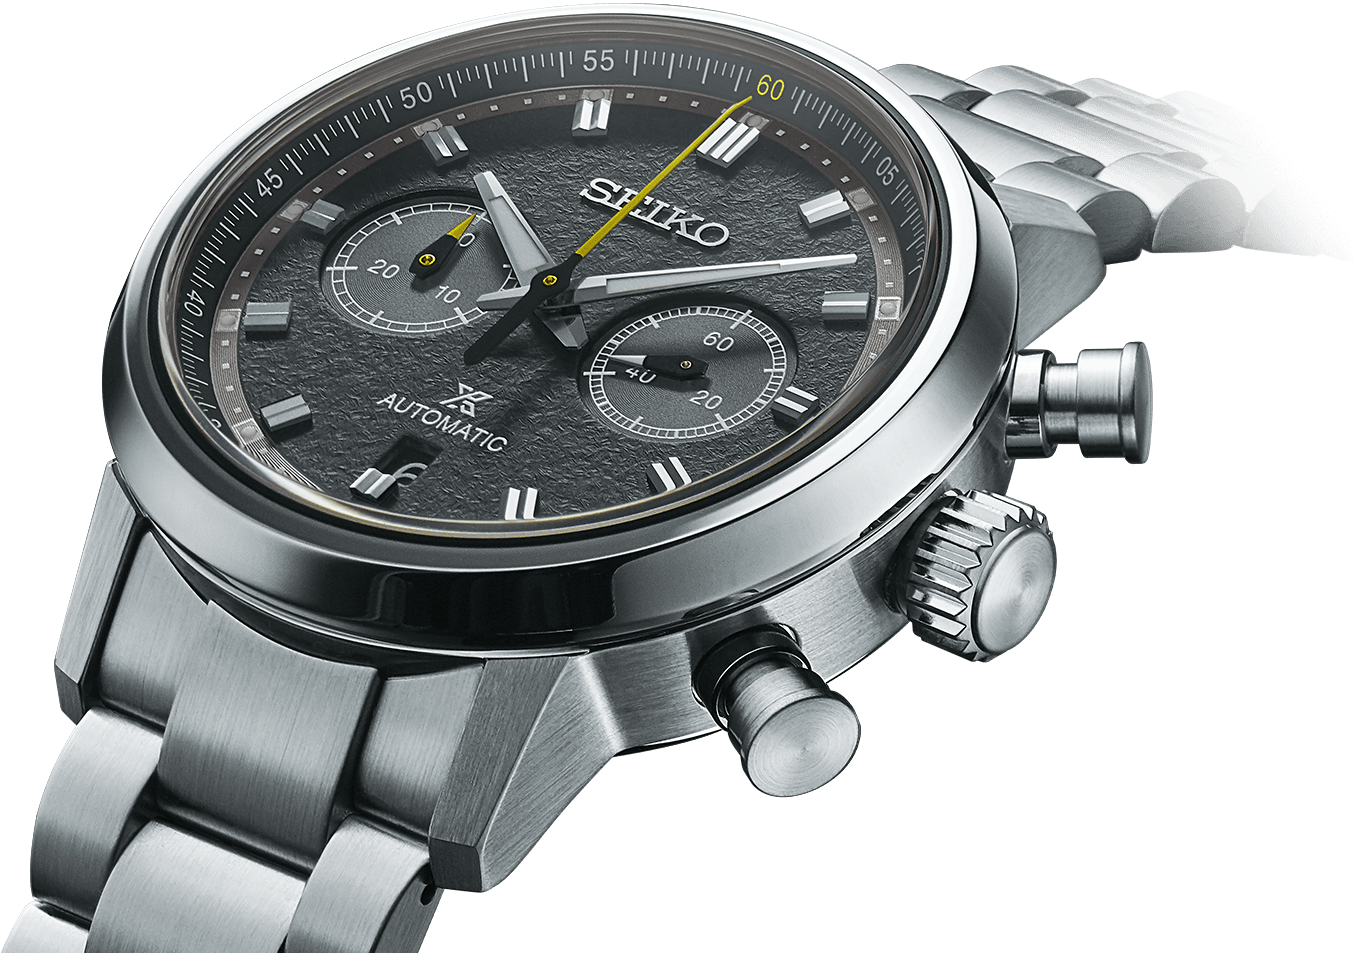 Seiko Revives Speedtimer Nameplate With New Automatic Chronograph Watches